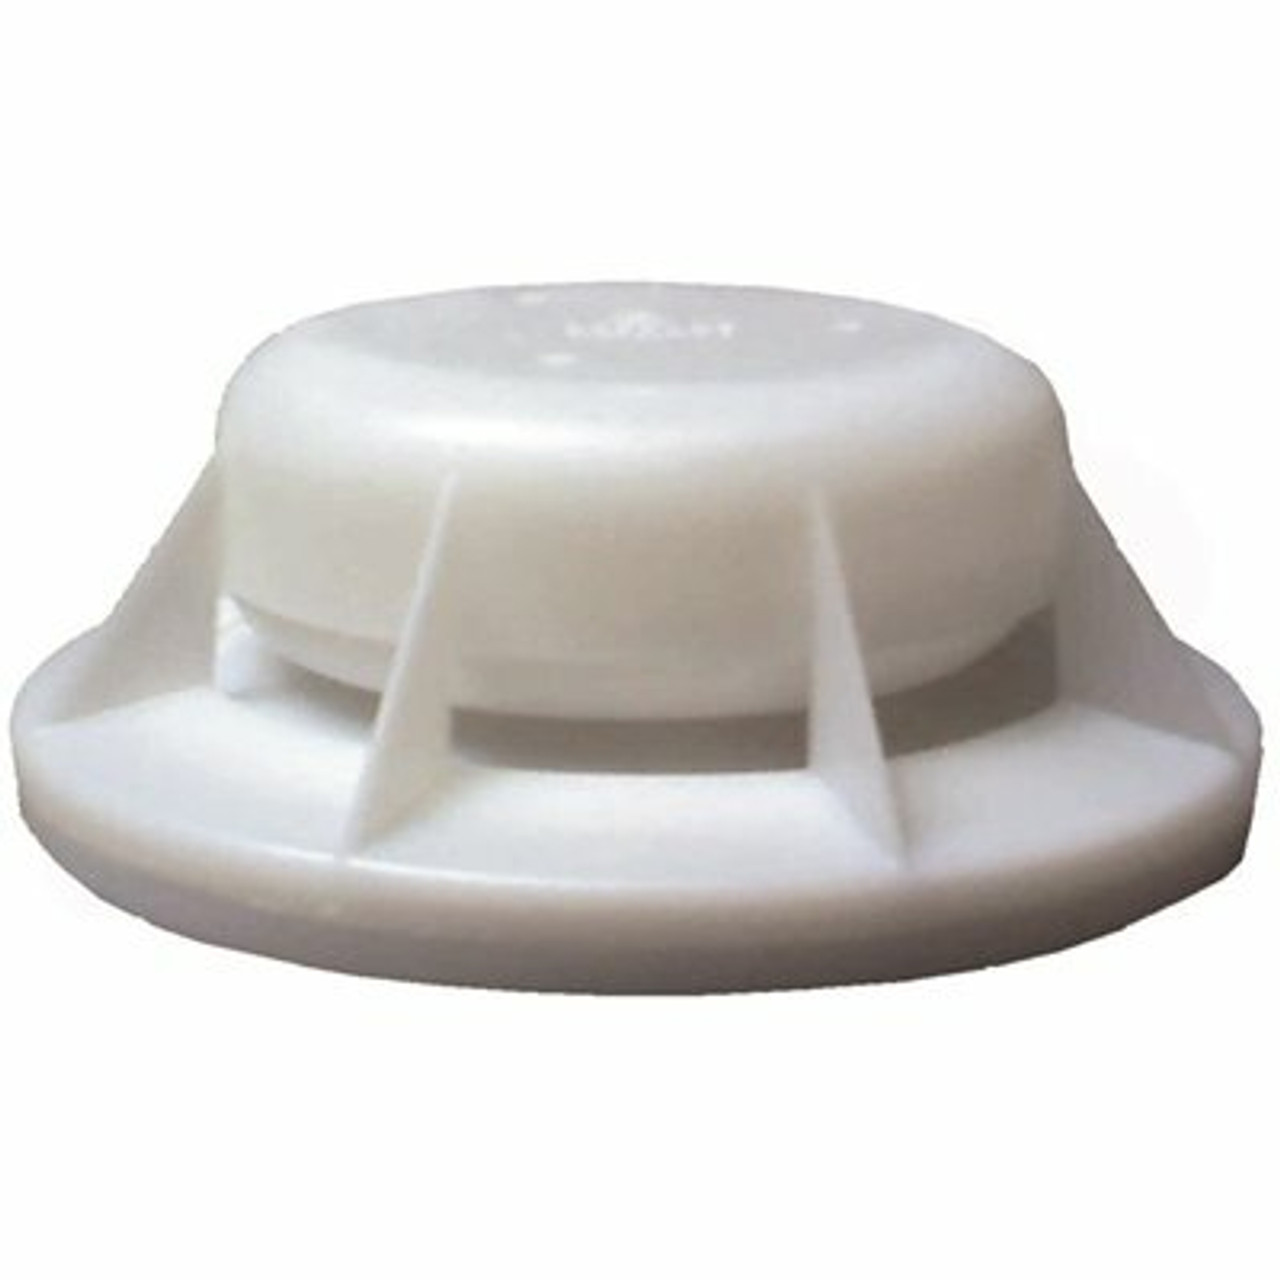 Sta-Rite Skimmer Replacement Float Assembly With O-Ring For U-3 Skimmer